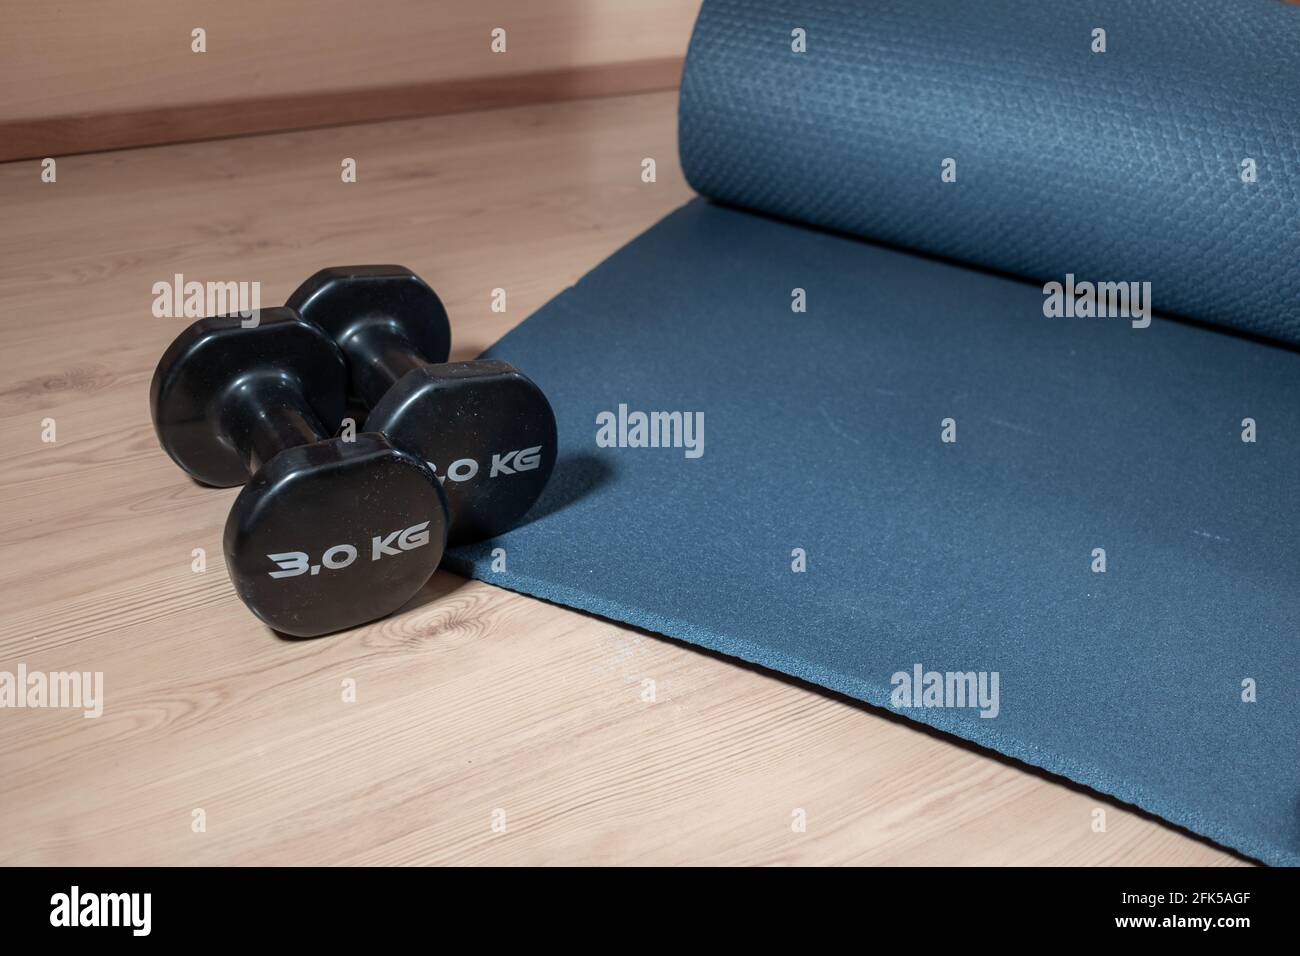 Closeup shot of 3 kg dumbbells and home training mat Stock Photo